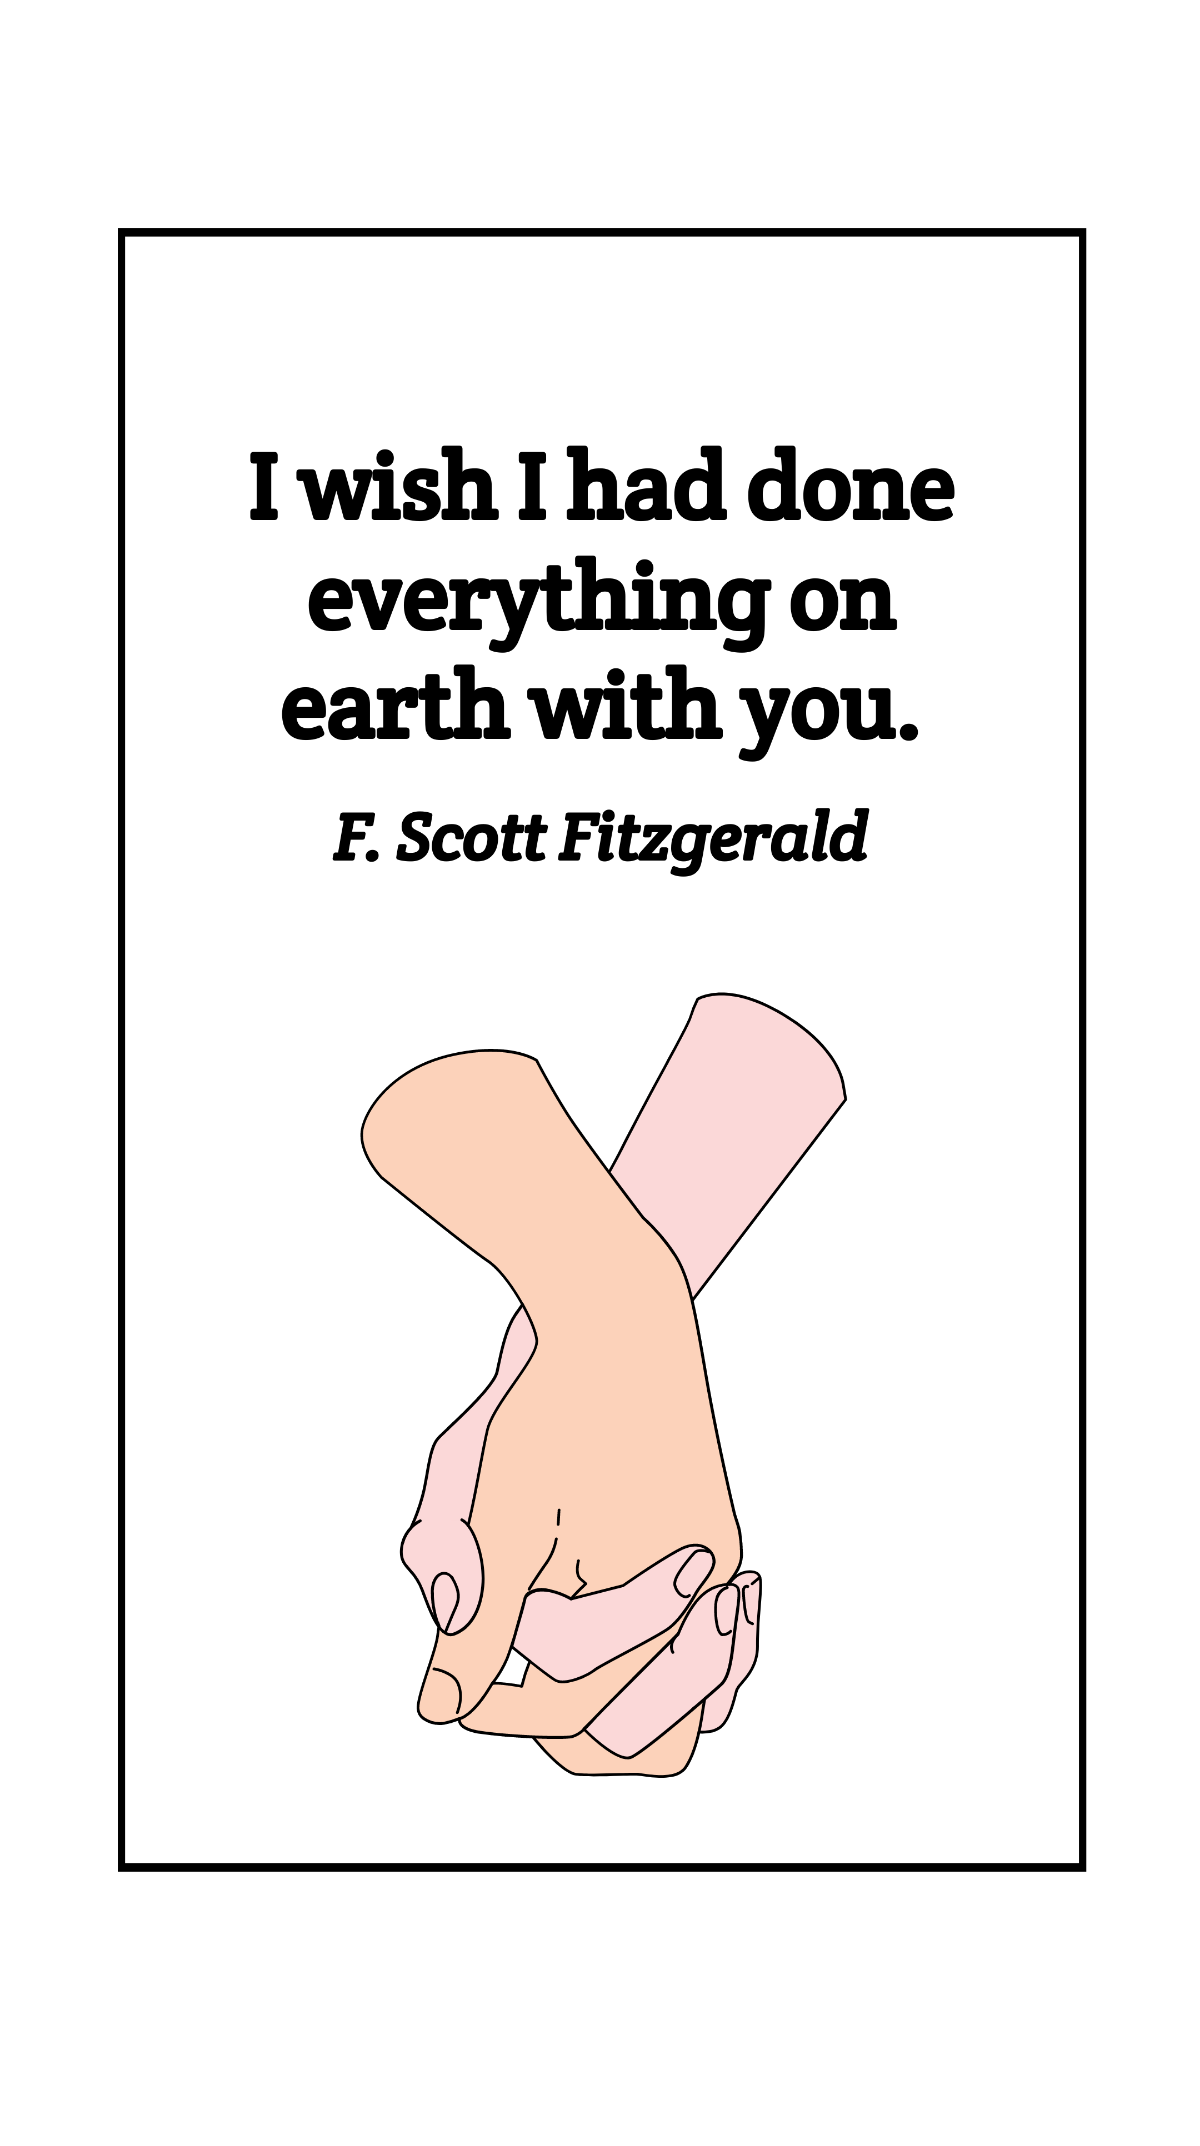 F. Scott Fitzgerald - I wish I had done everything on earth with you. Template